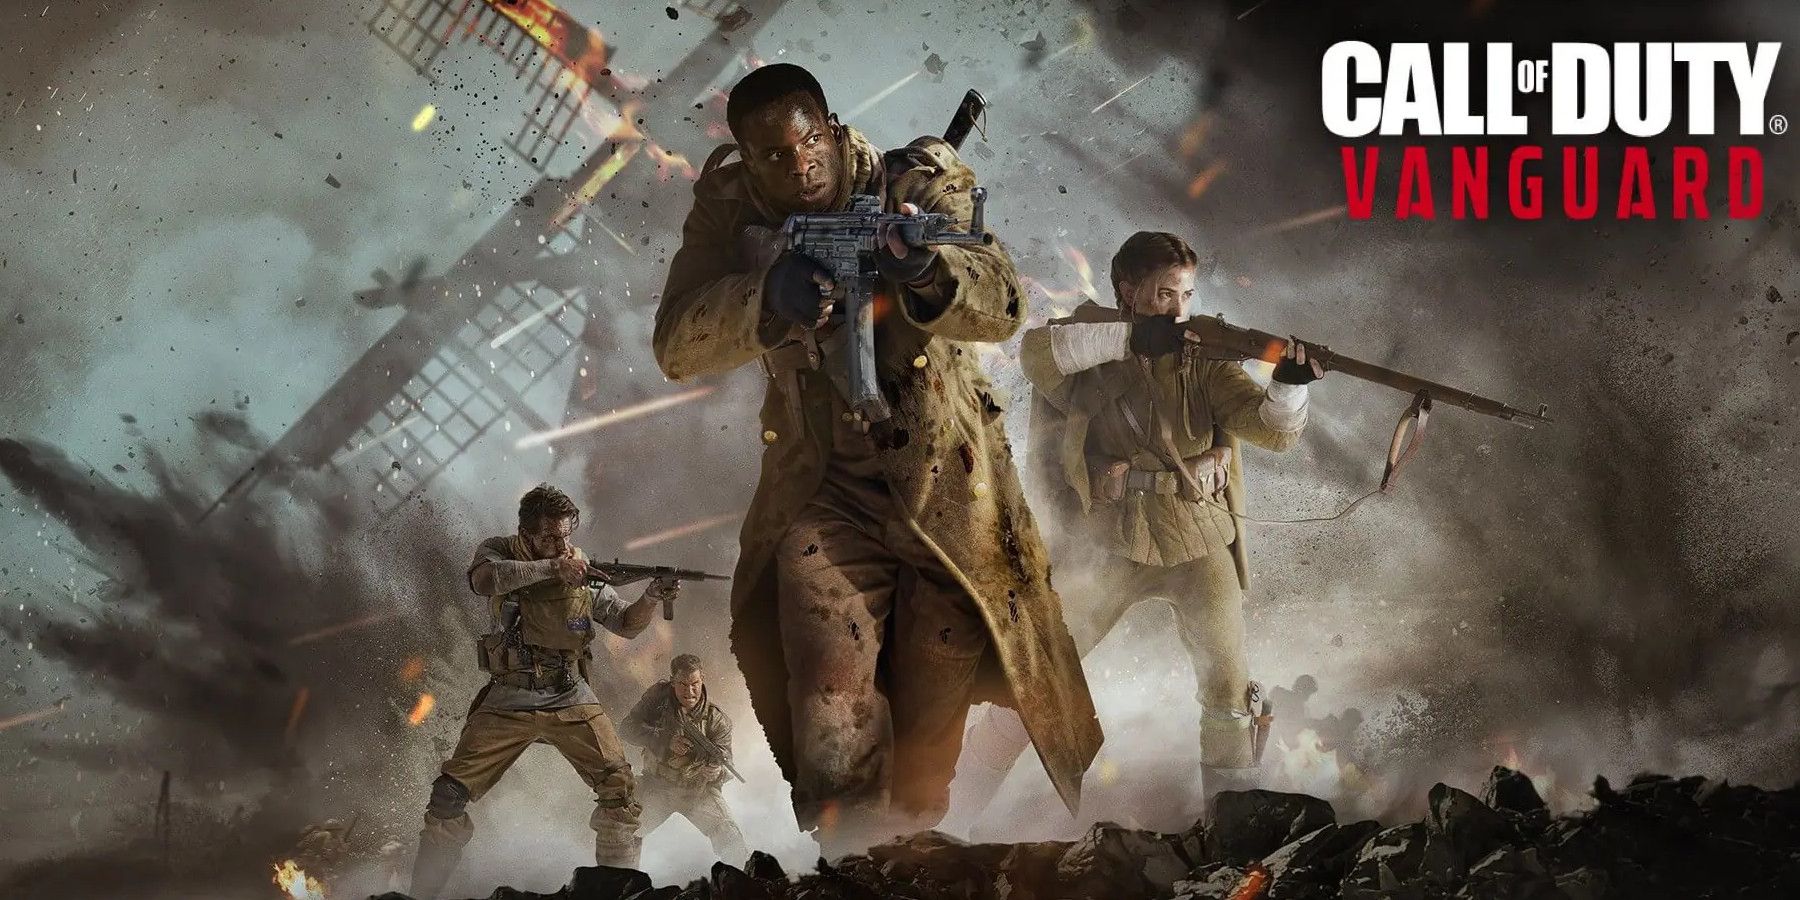 call-of-duty-vanguard-protagonists-action-shot-promo-image